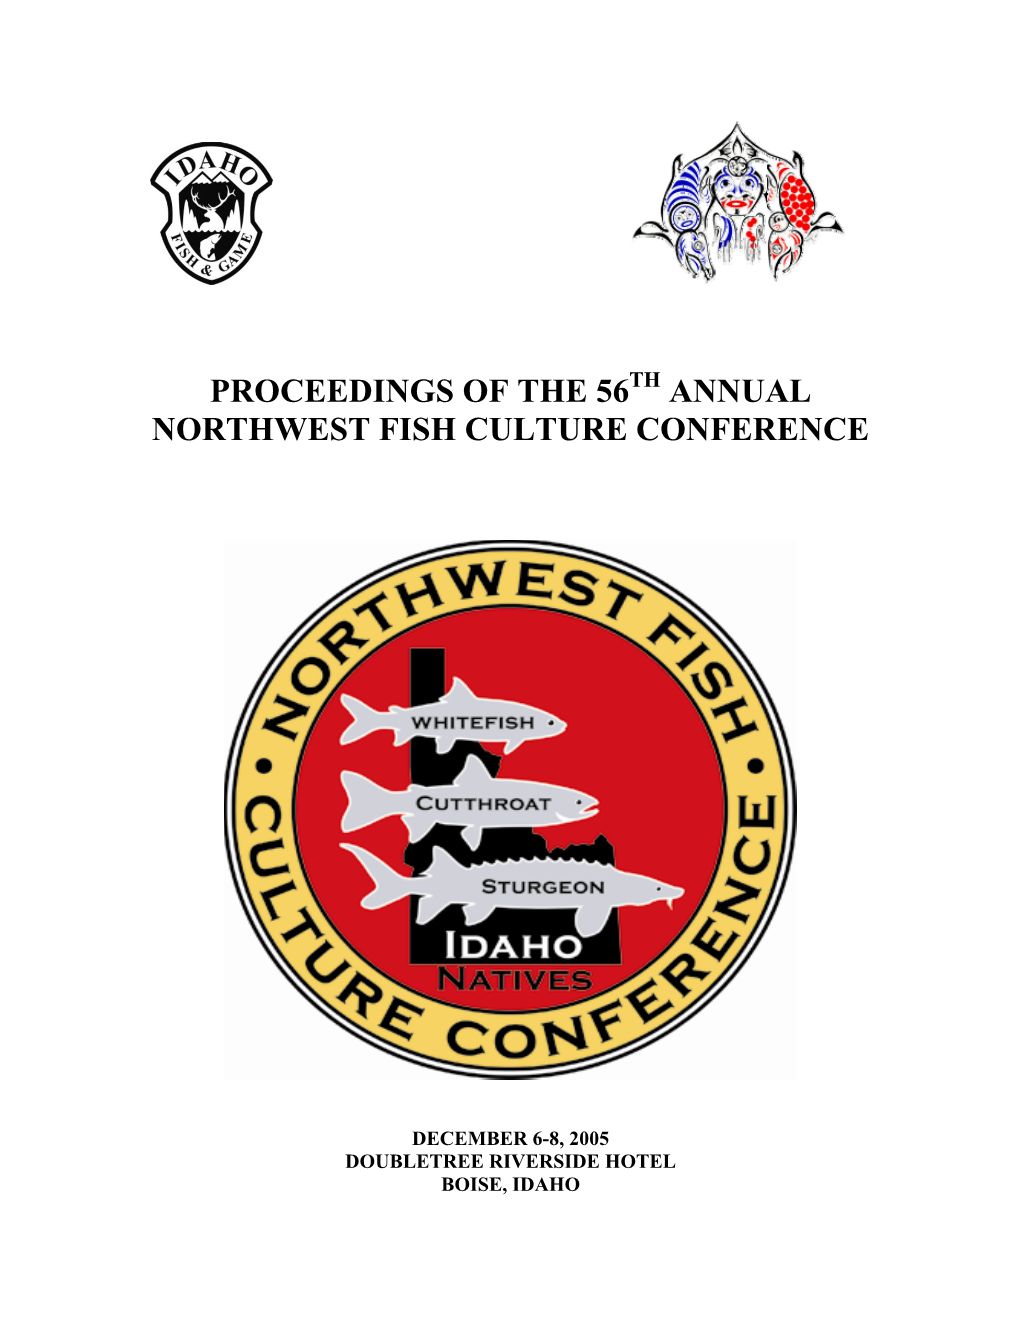 Annual Northwest Fish Culture Conference